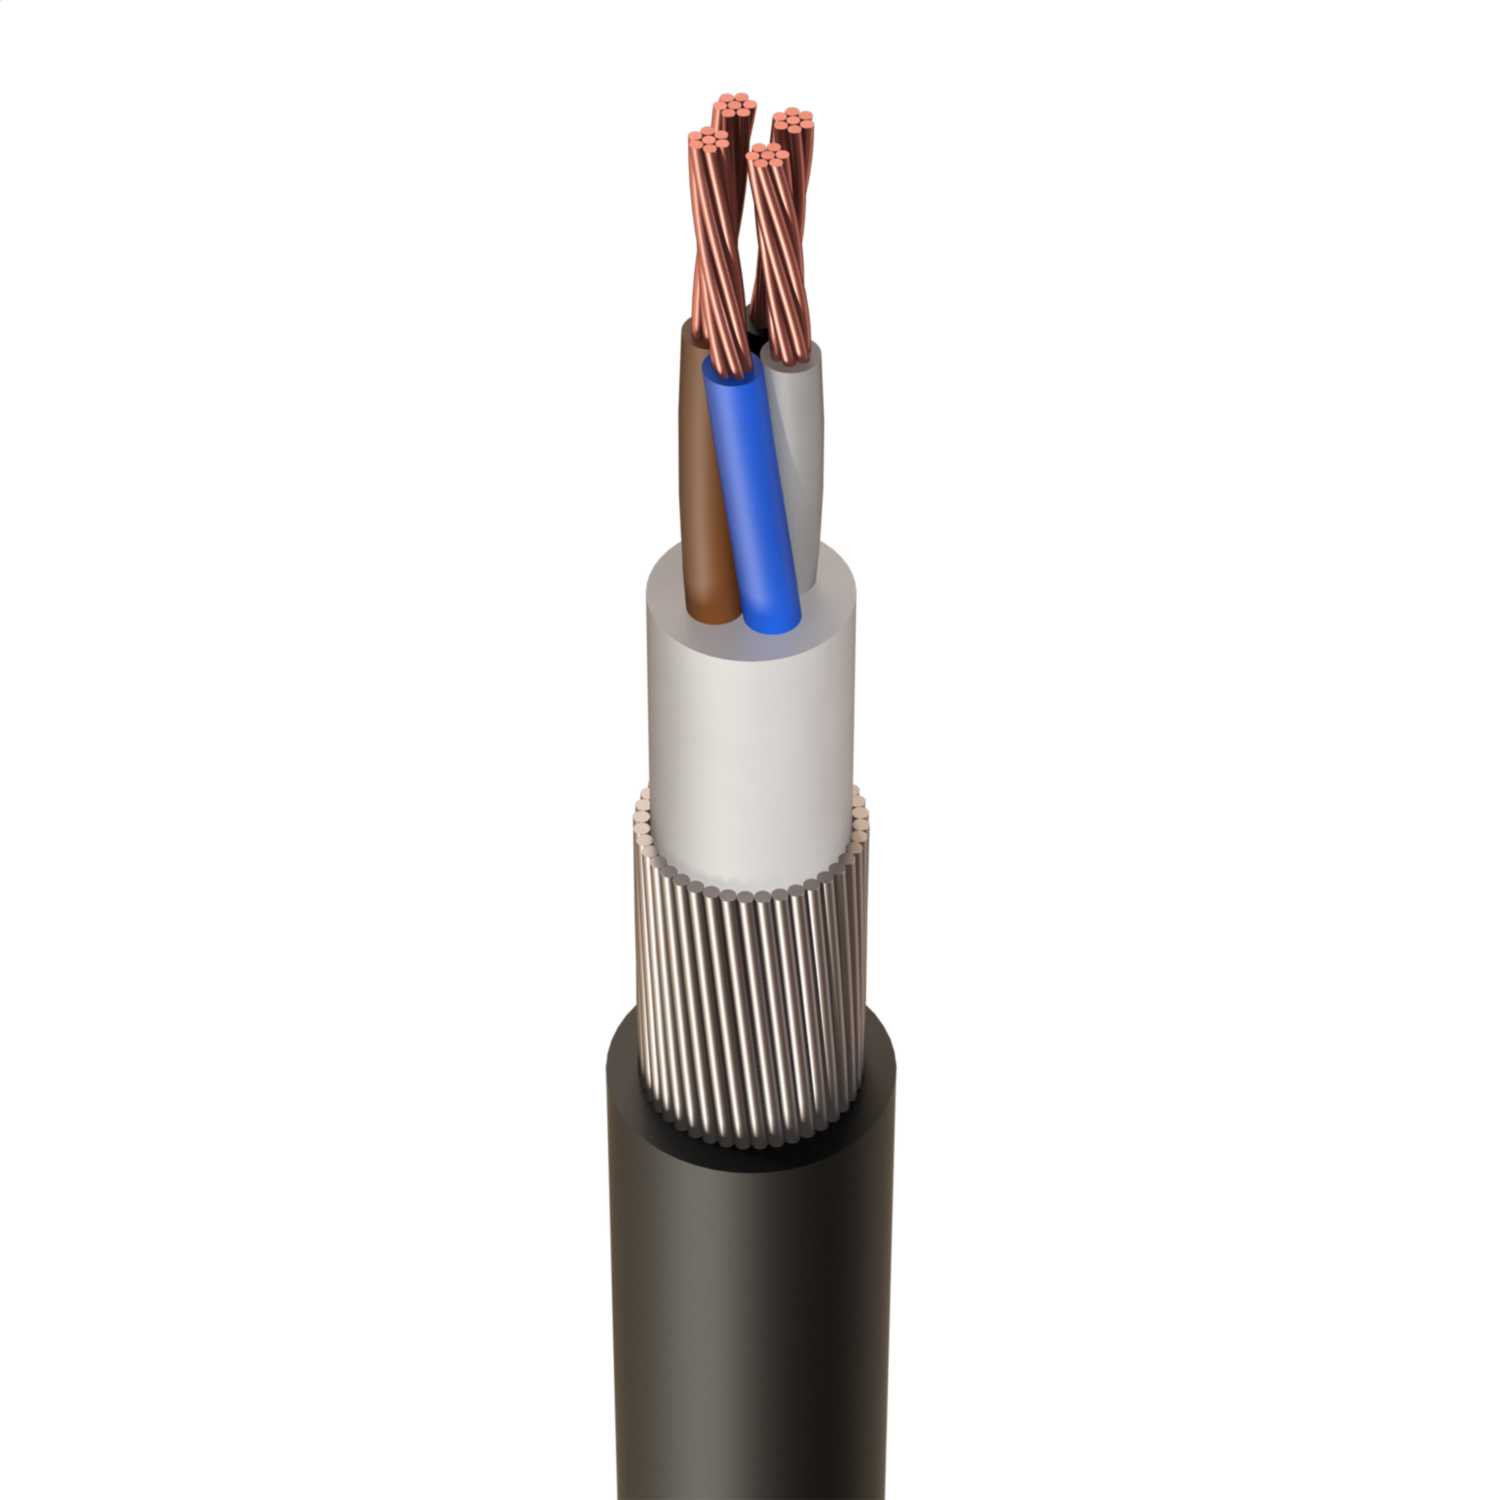 SWA cable 6944X 4 core 4 x 2.5 mm² armoured cable cut to order price per metre